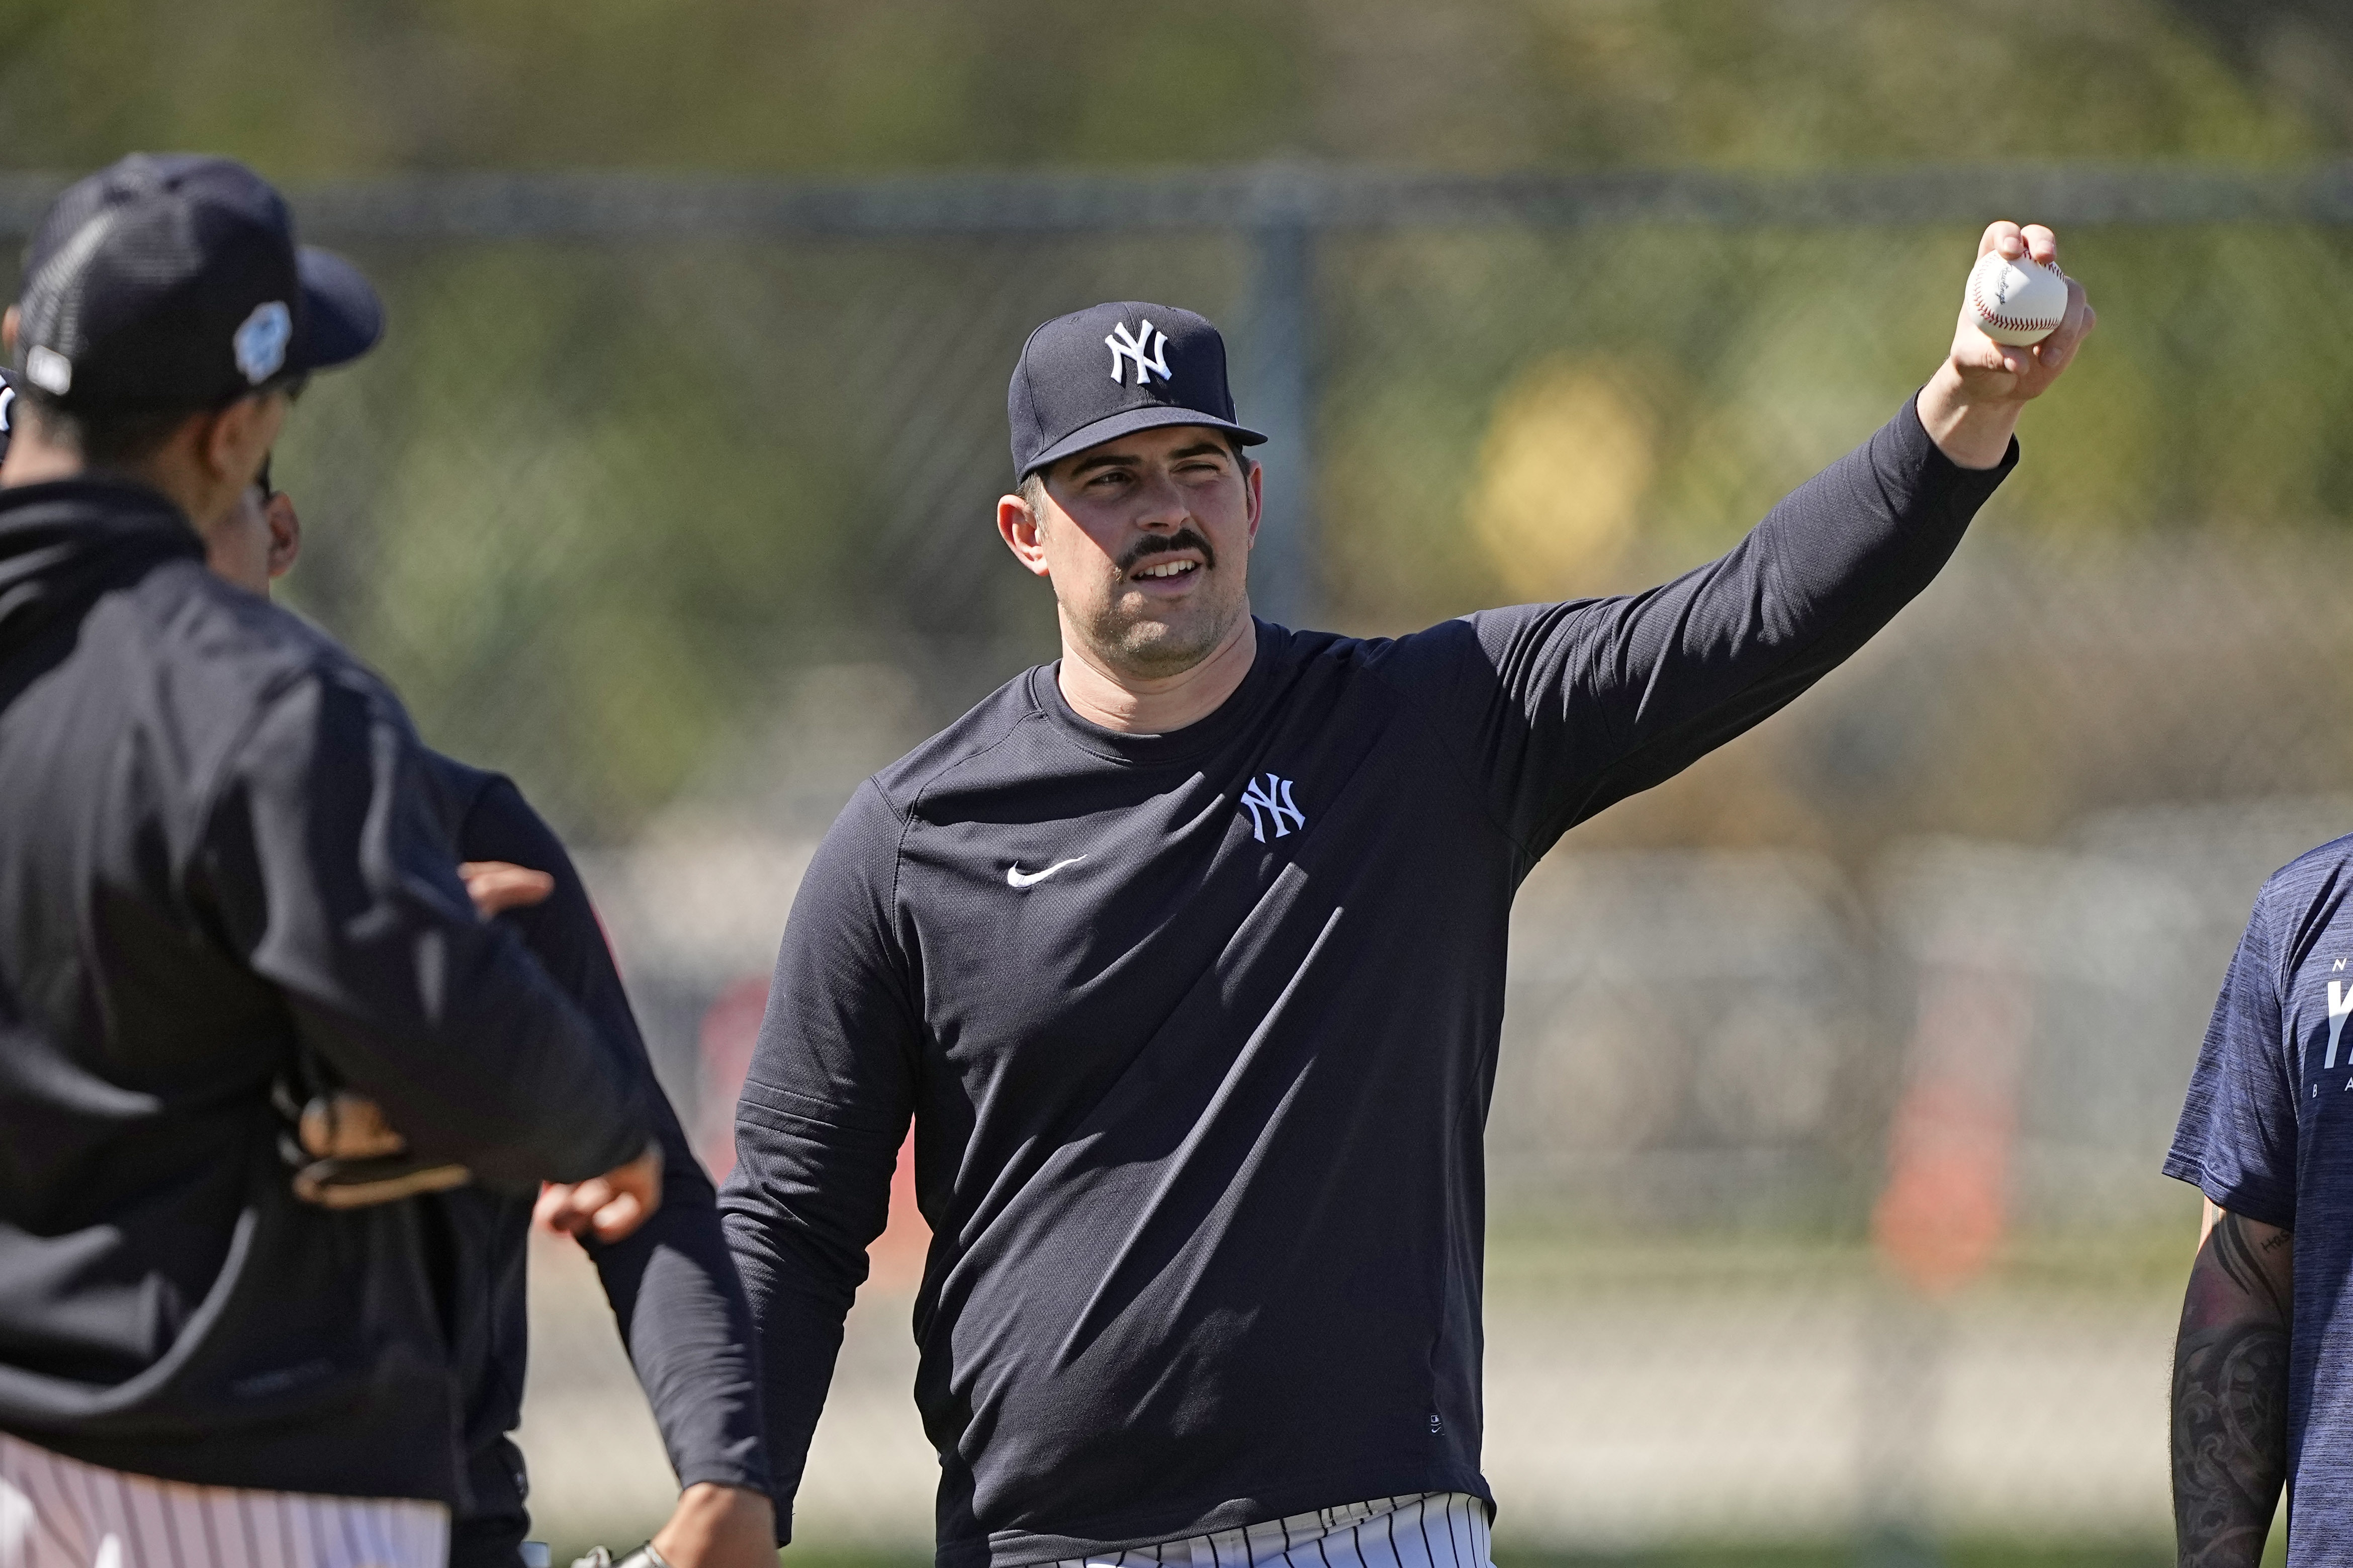 Jasson Dominguez injury update: Yankees star prospect out for year with  torn elbow ligament